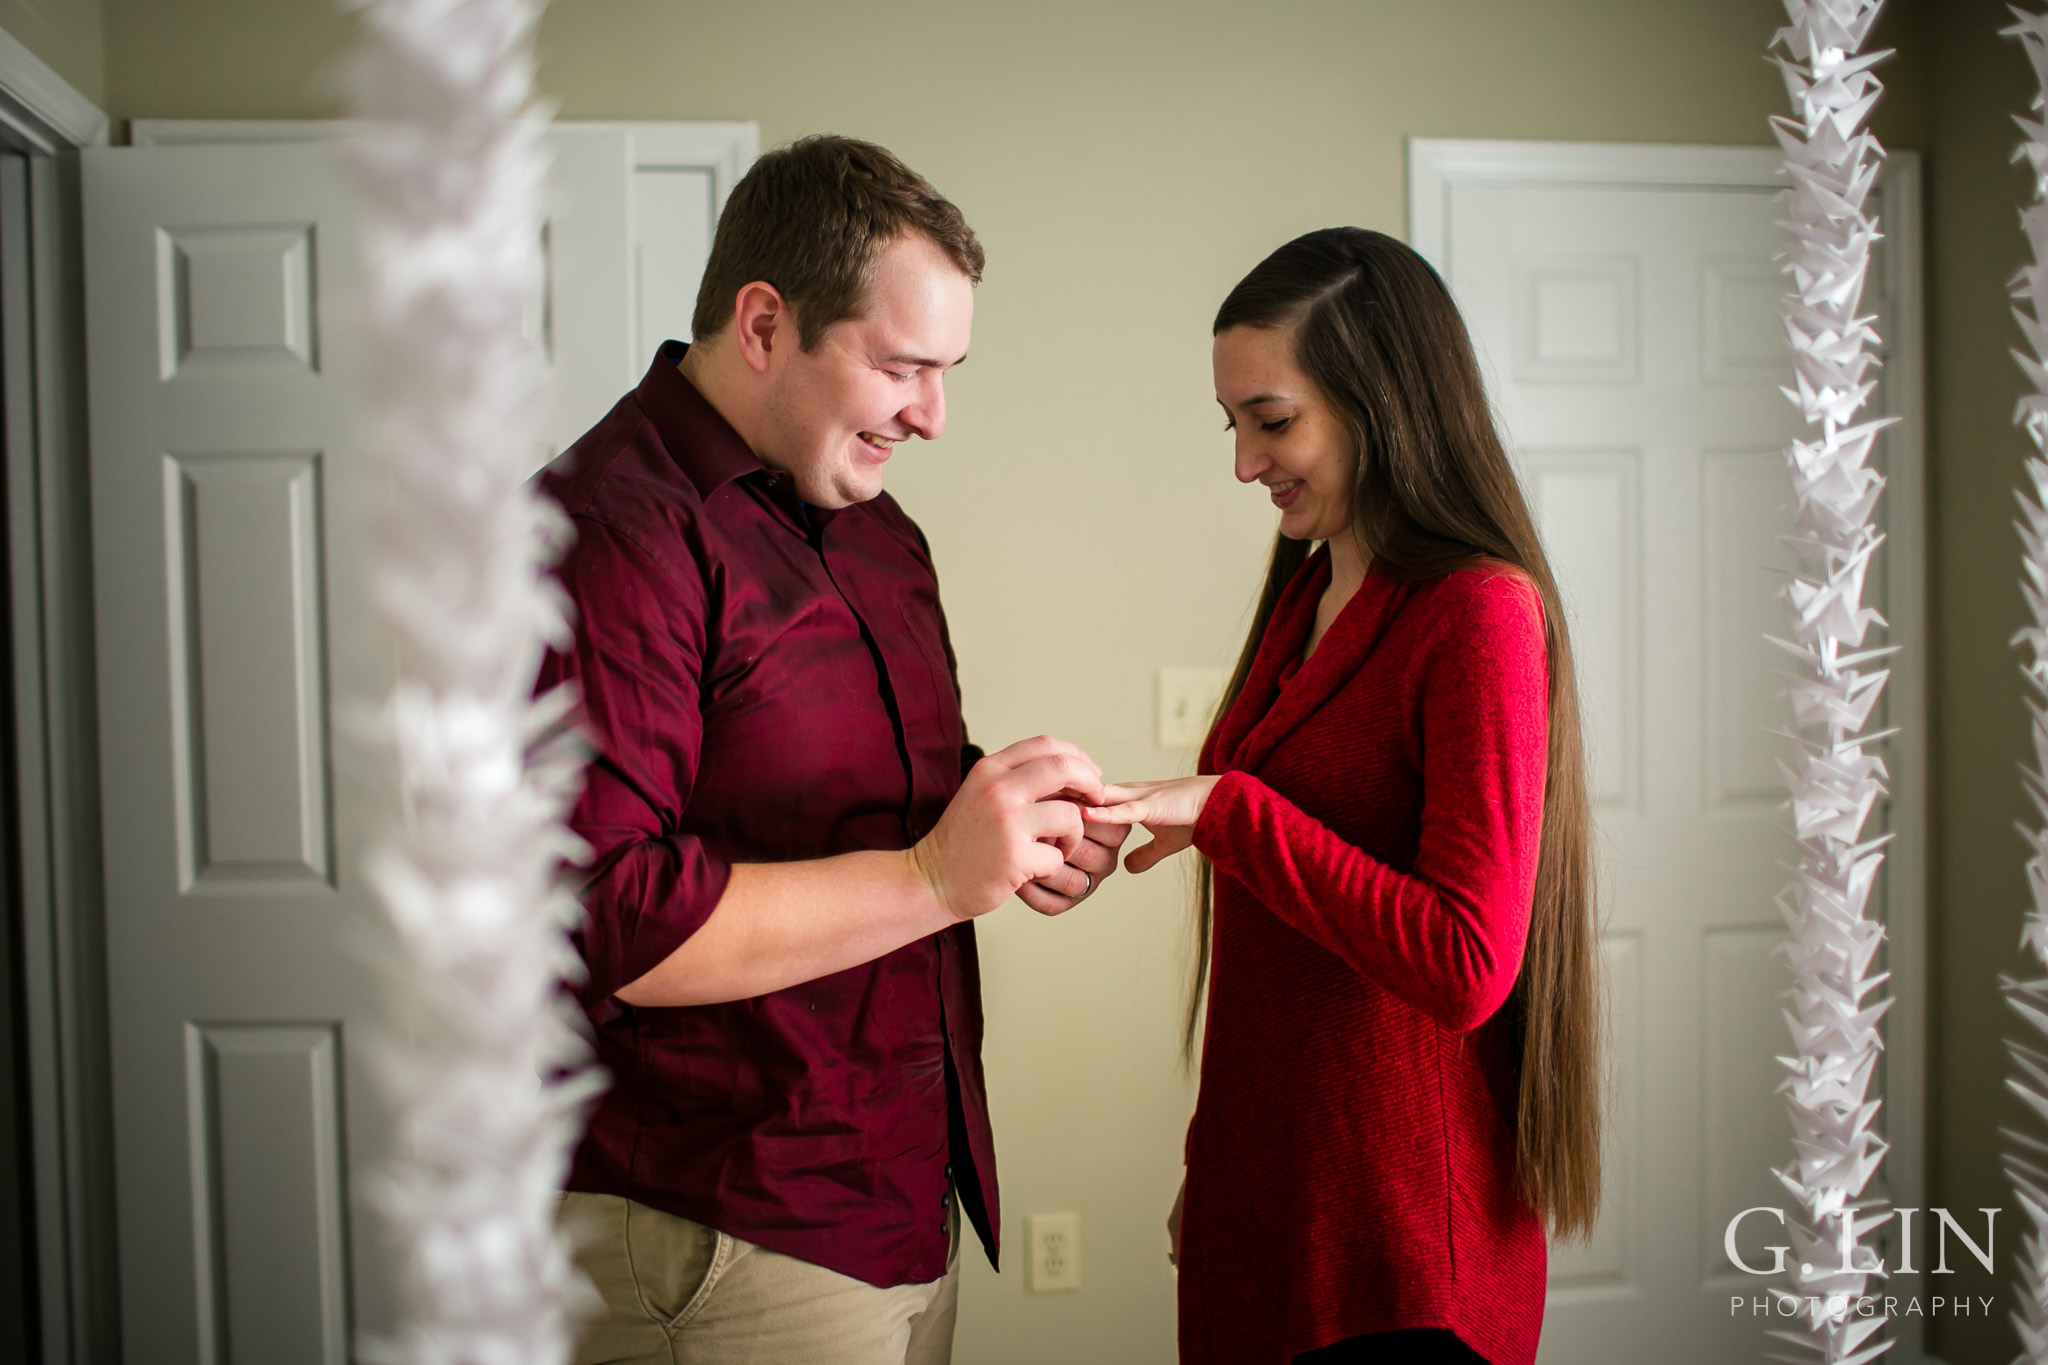 Putting ring on the girl for proposal | Raleigh Engagement Photographer | By G. Lin Photography